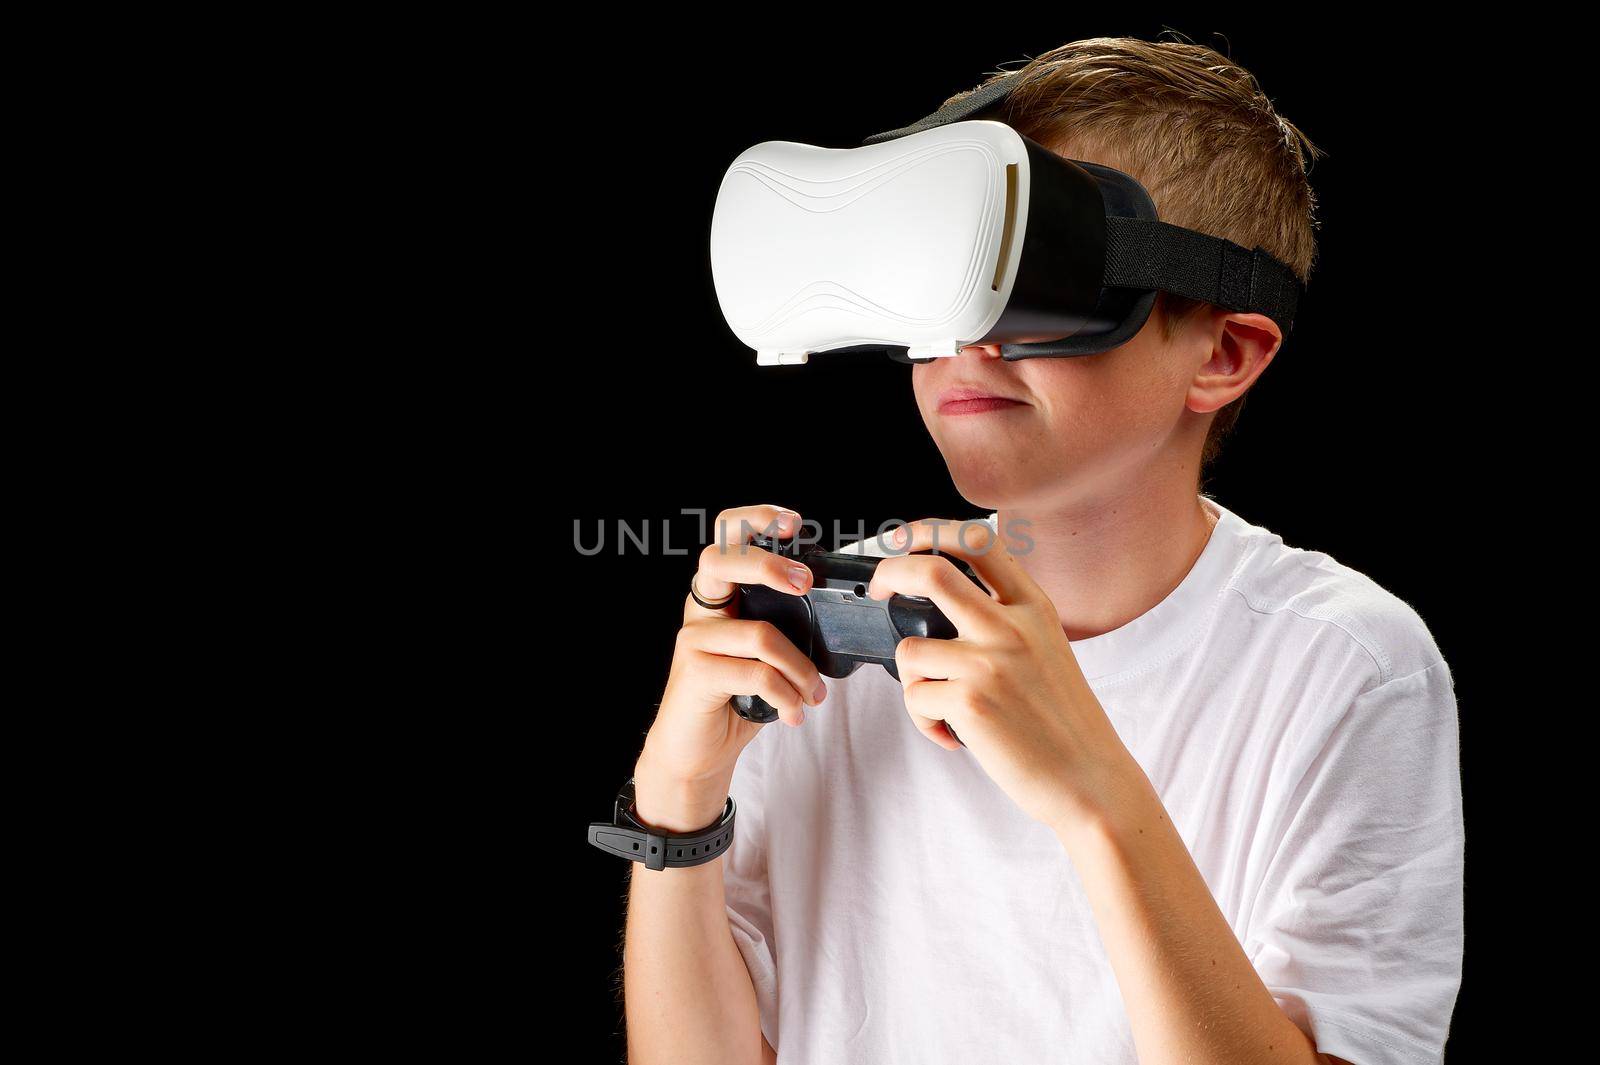 VR Goggles used by a child. Concept of new technology, gaming, remote education, virtual reality. Metaverse world through VR glasses. boy in Virtual reality headset isolated on black background